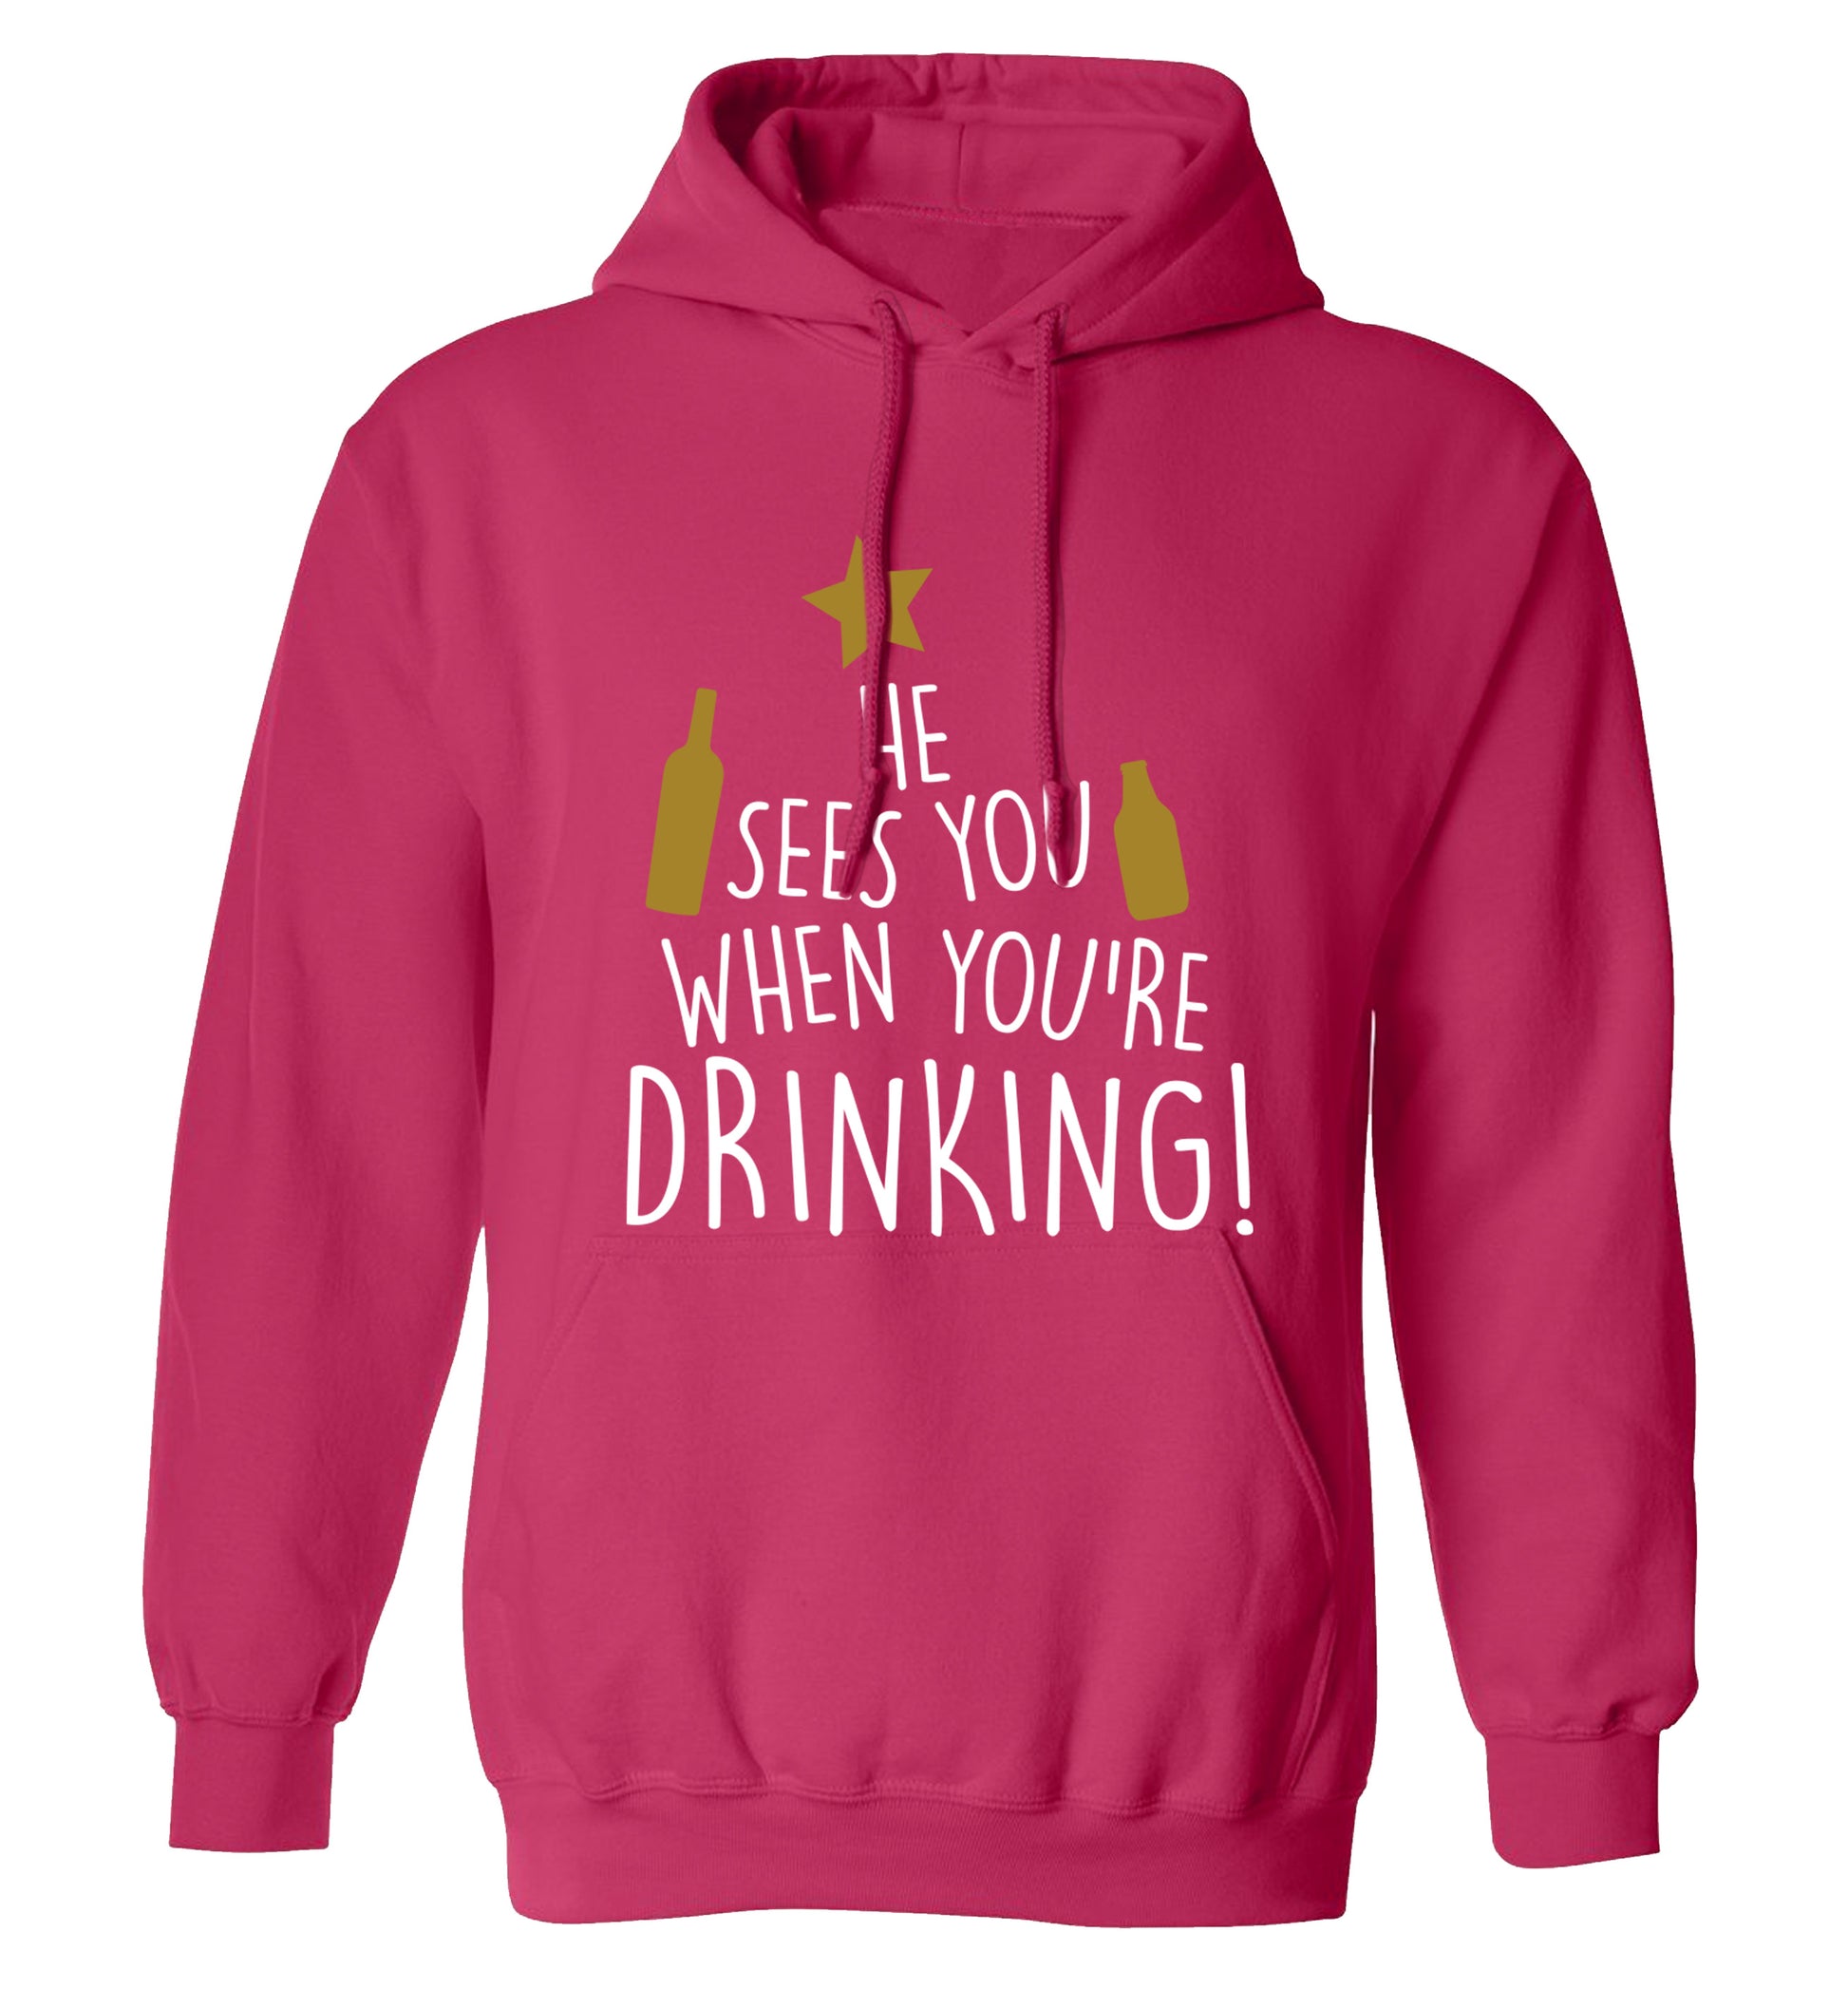 He sees you when you're drinking adults unisex pink hoodie 2XL